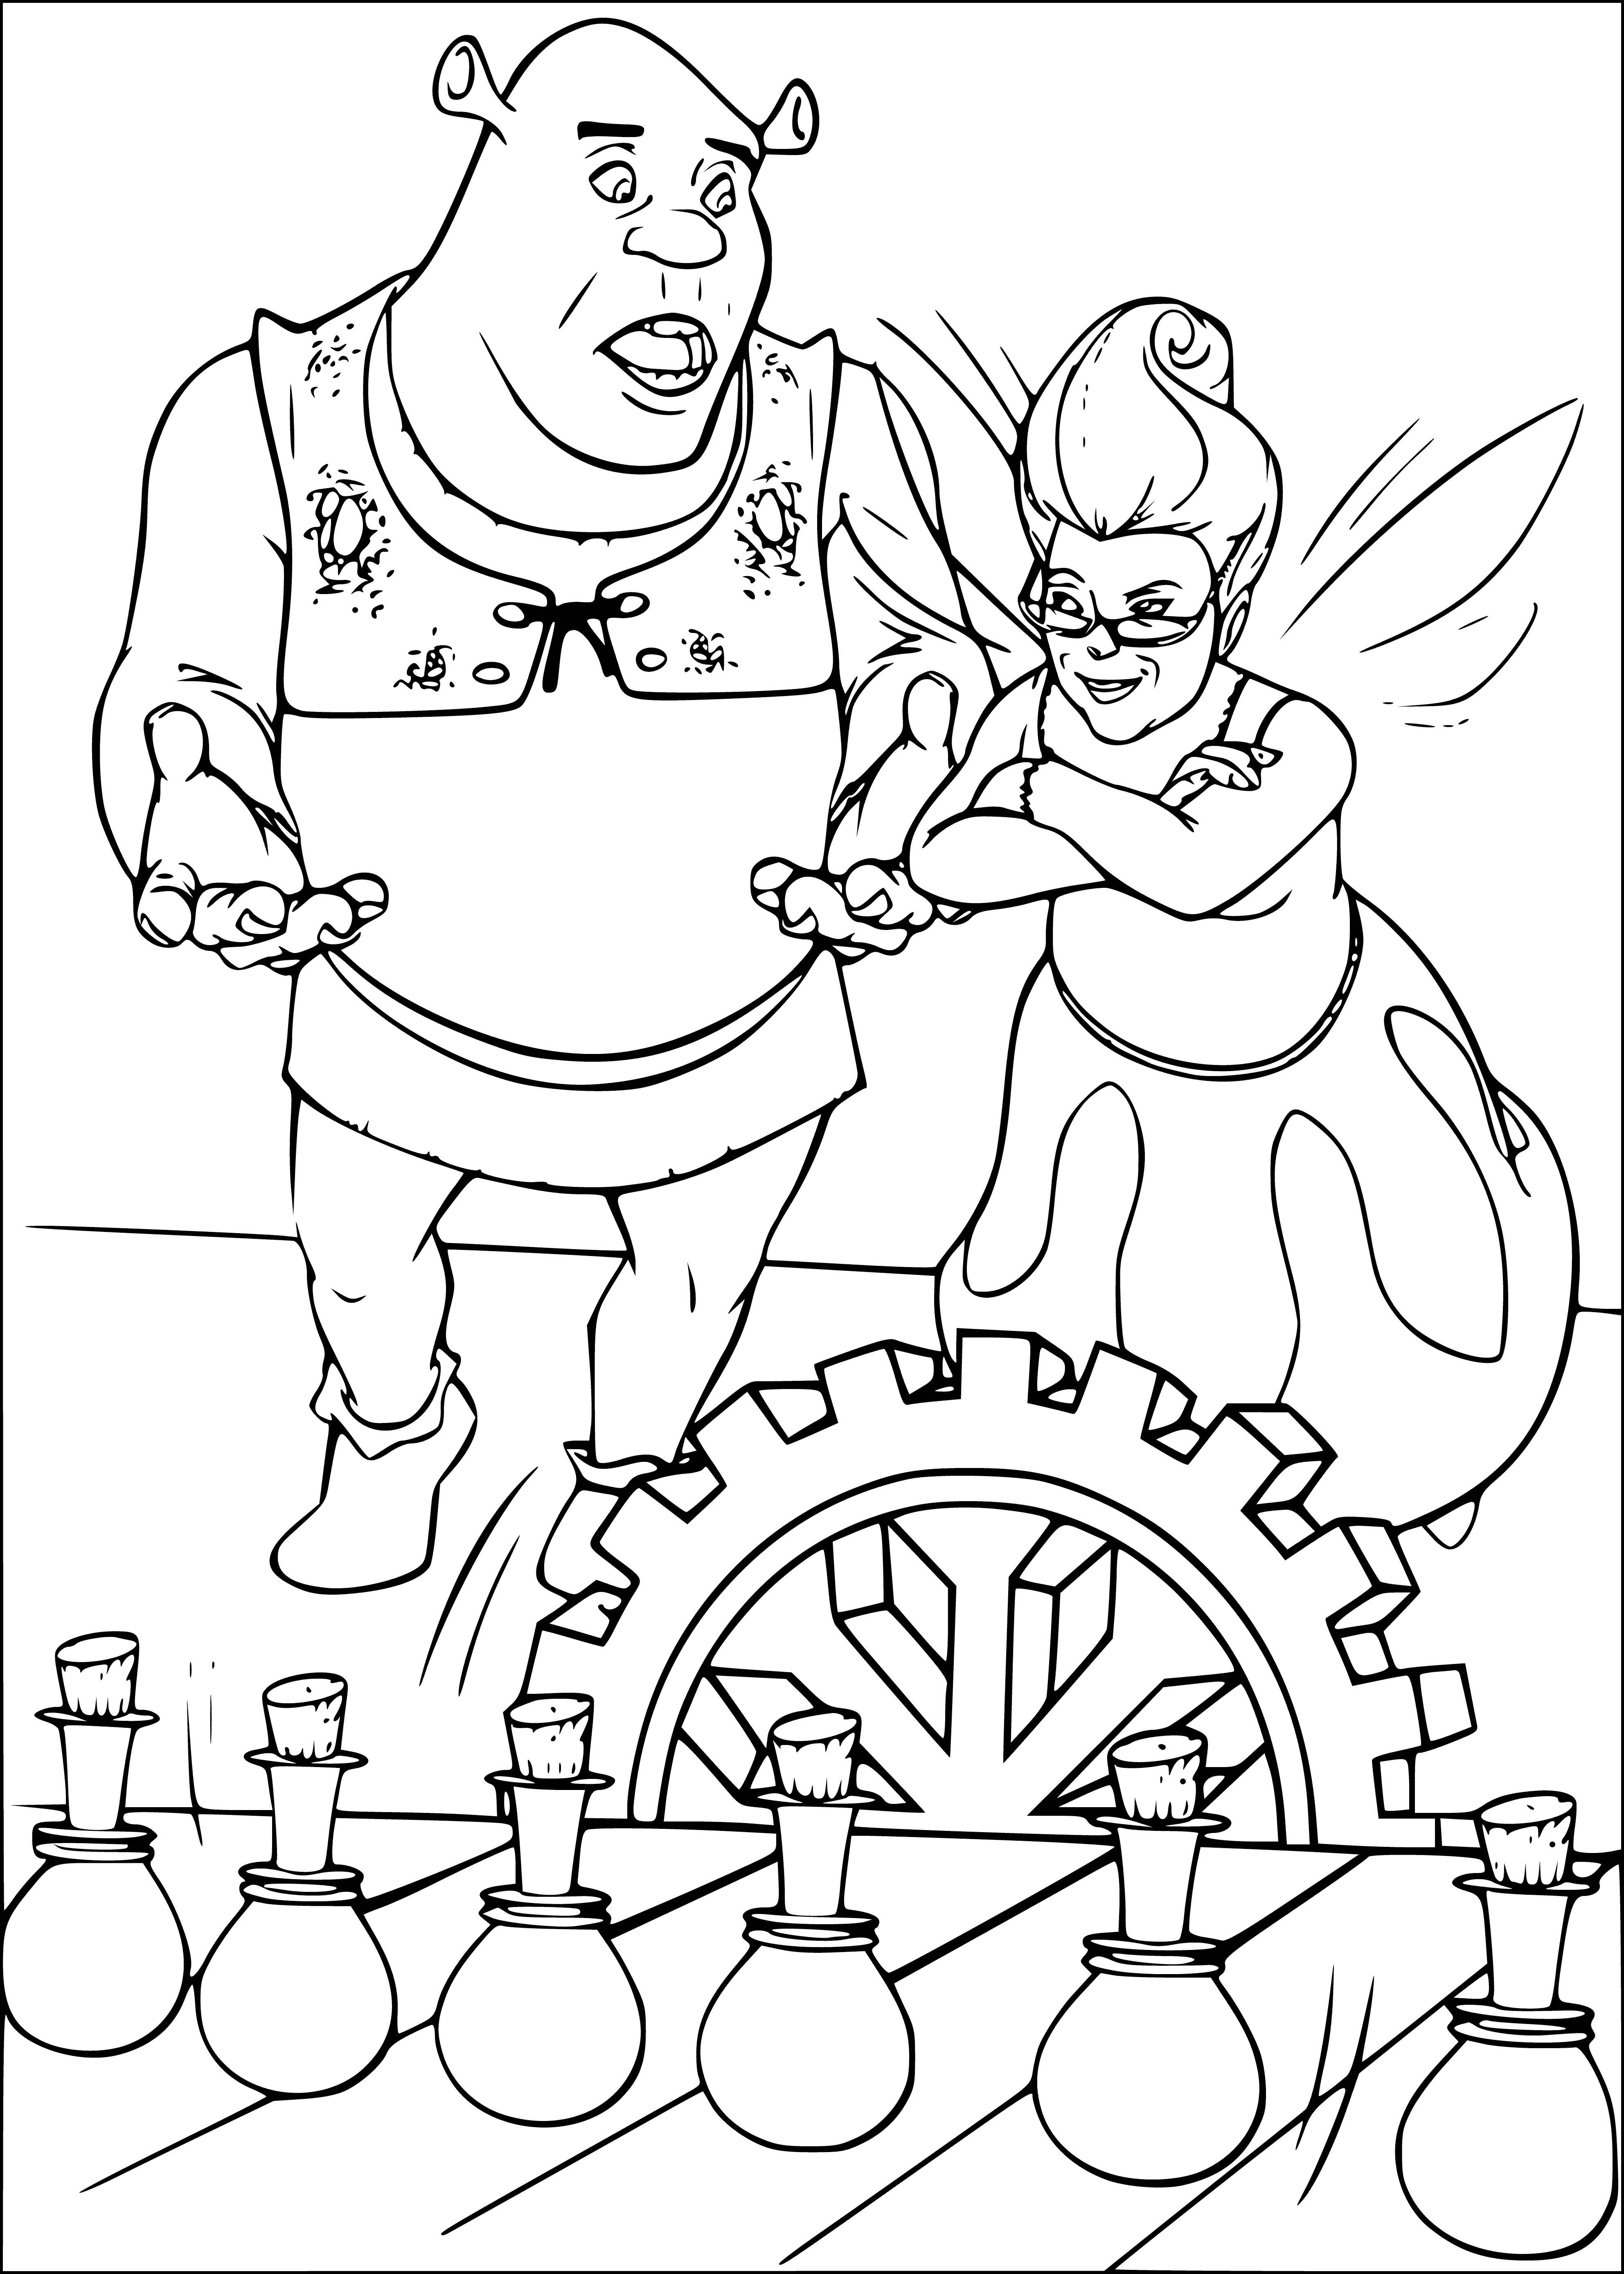 Cannibal and Fairy coloring page